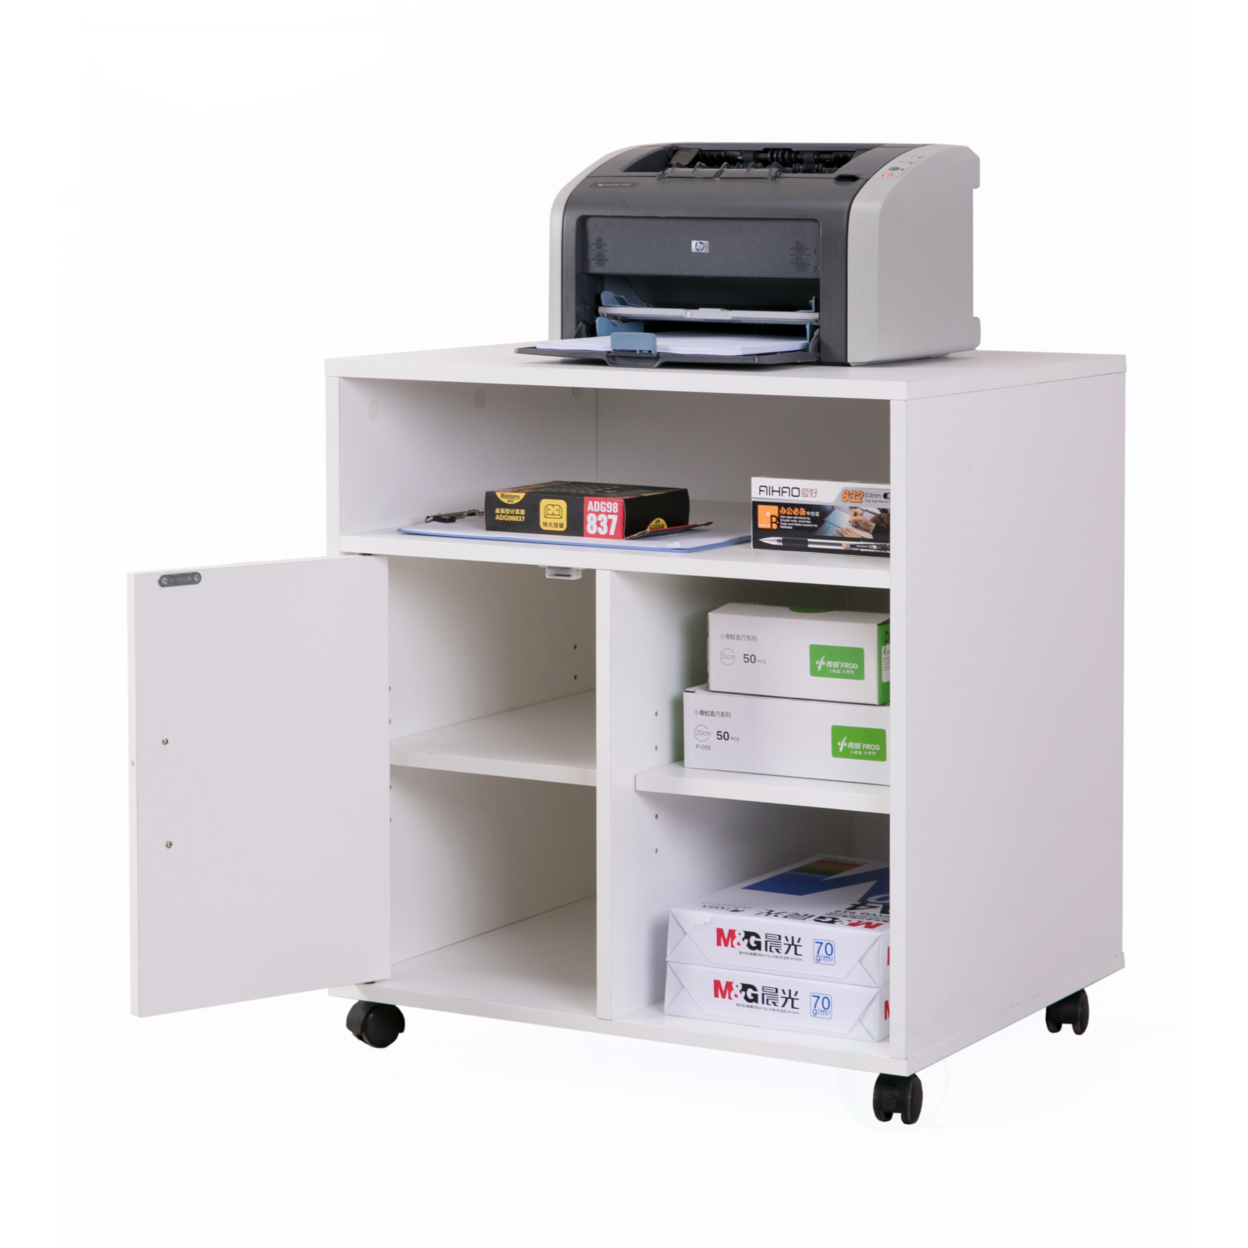 Printer Kitchen Office Storage Stand With Casters - White